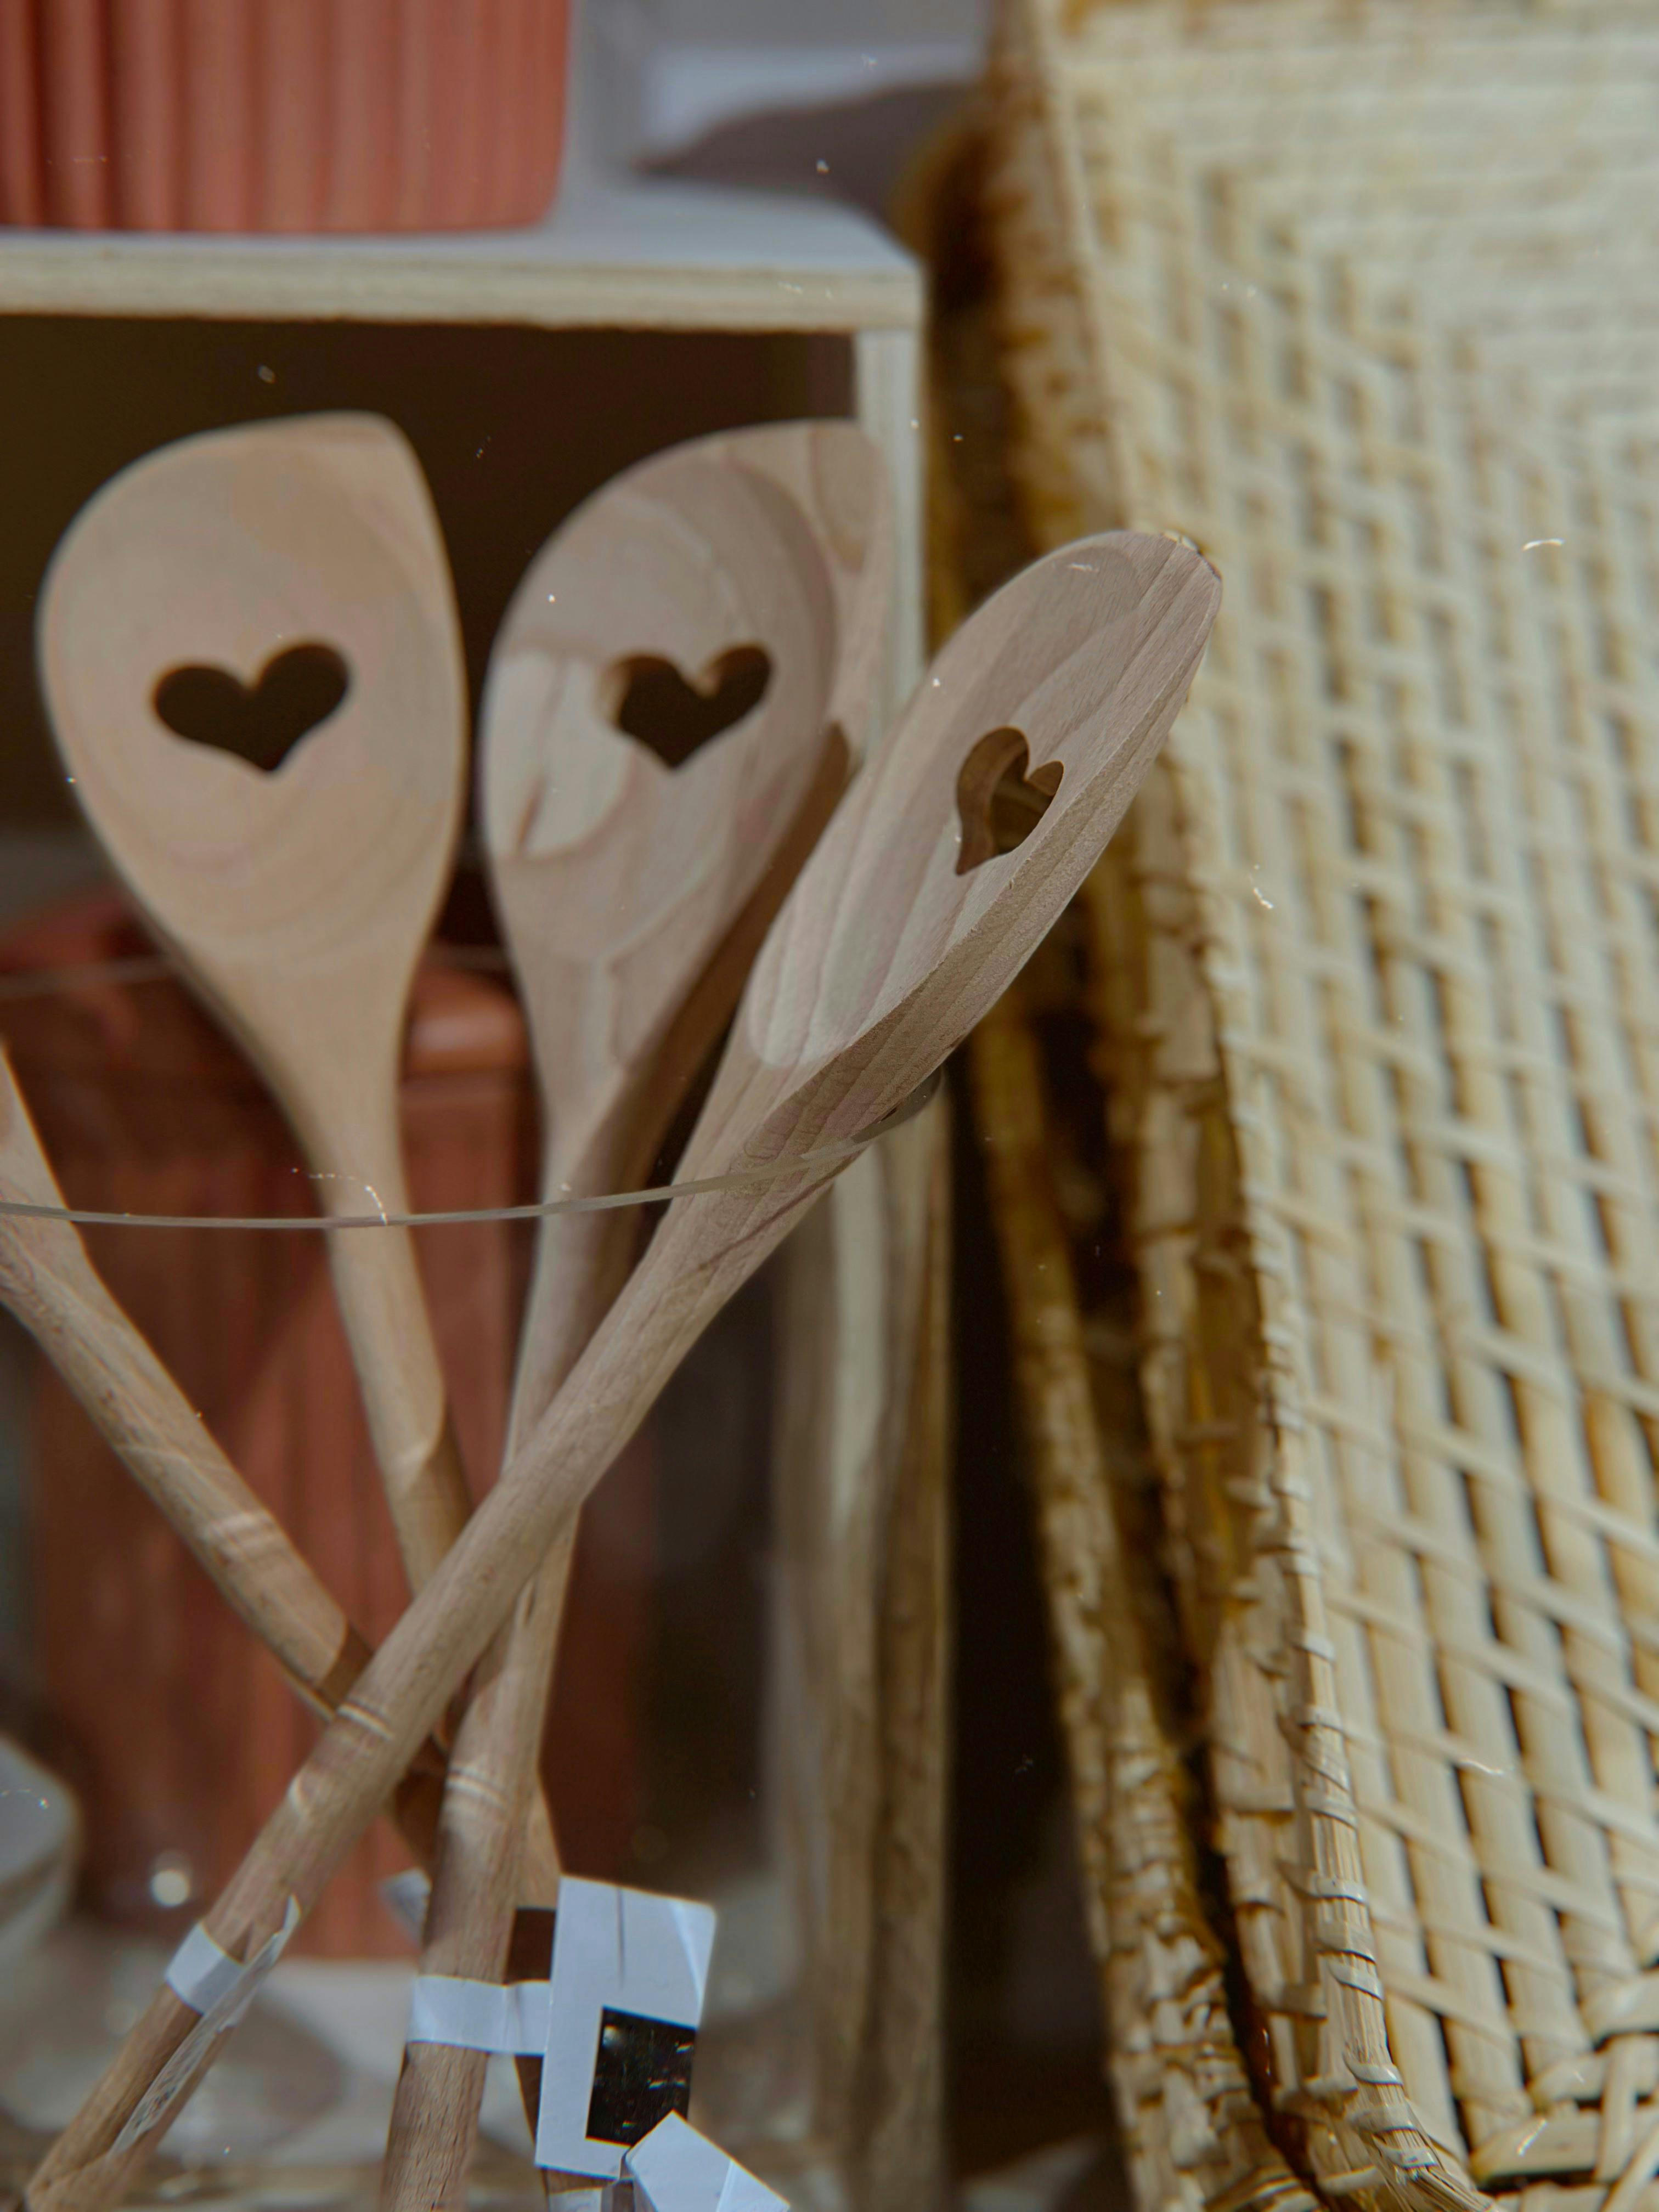 Free Wooden Spoons with Heart Shaped Holes Stock Photo